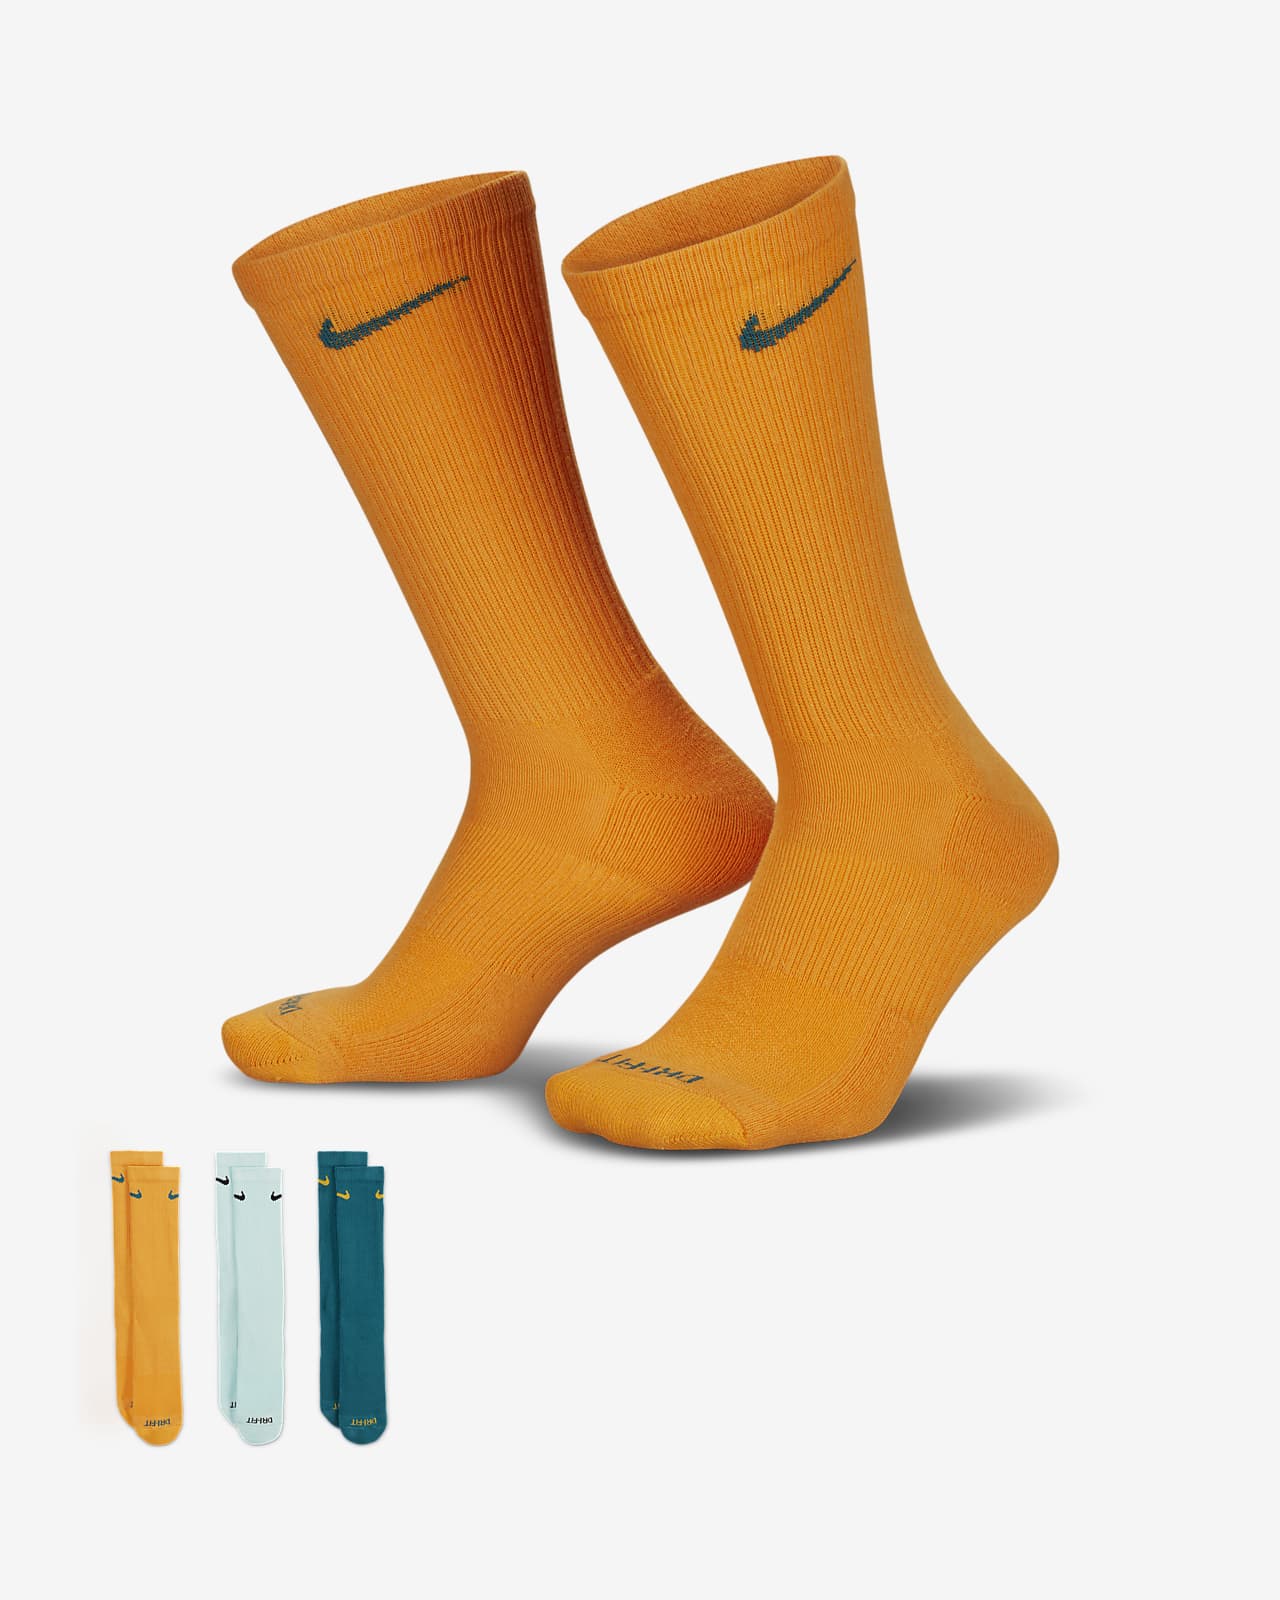 Chaussettes femme Nike Everyday Plus Lightweight